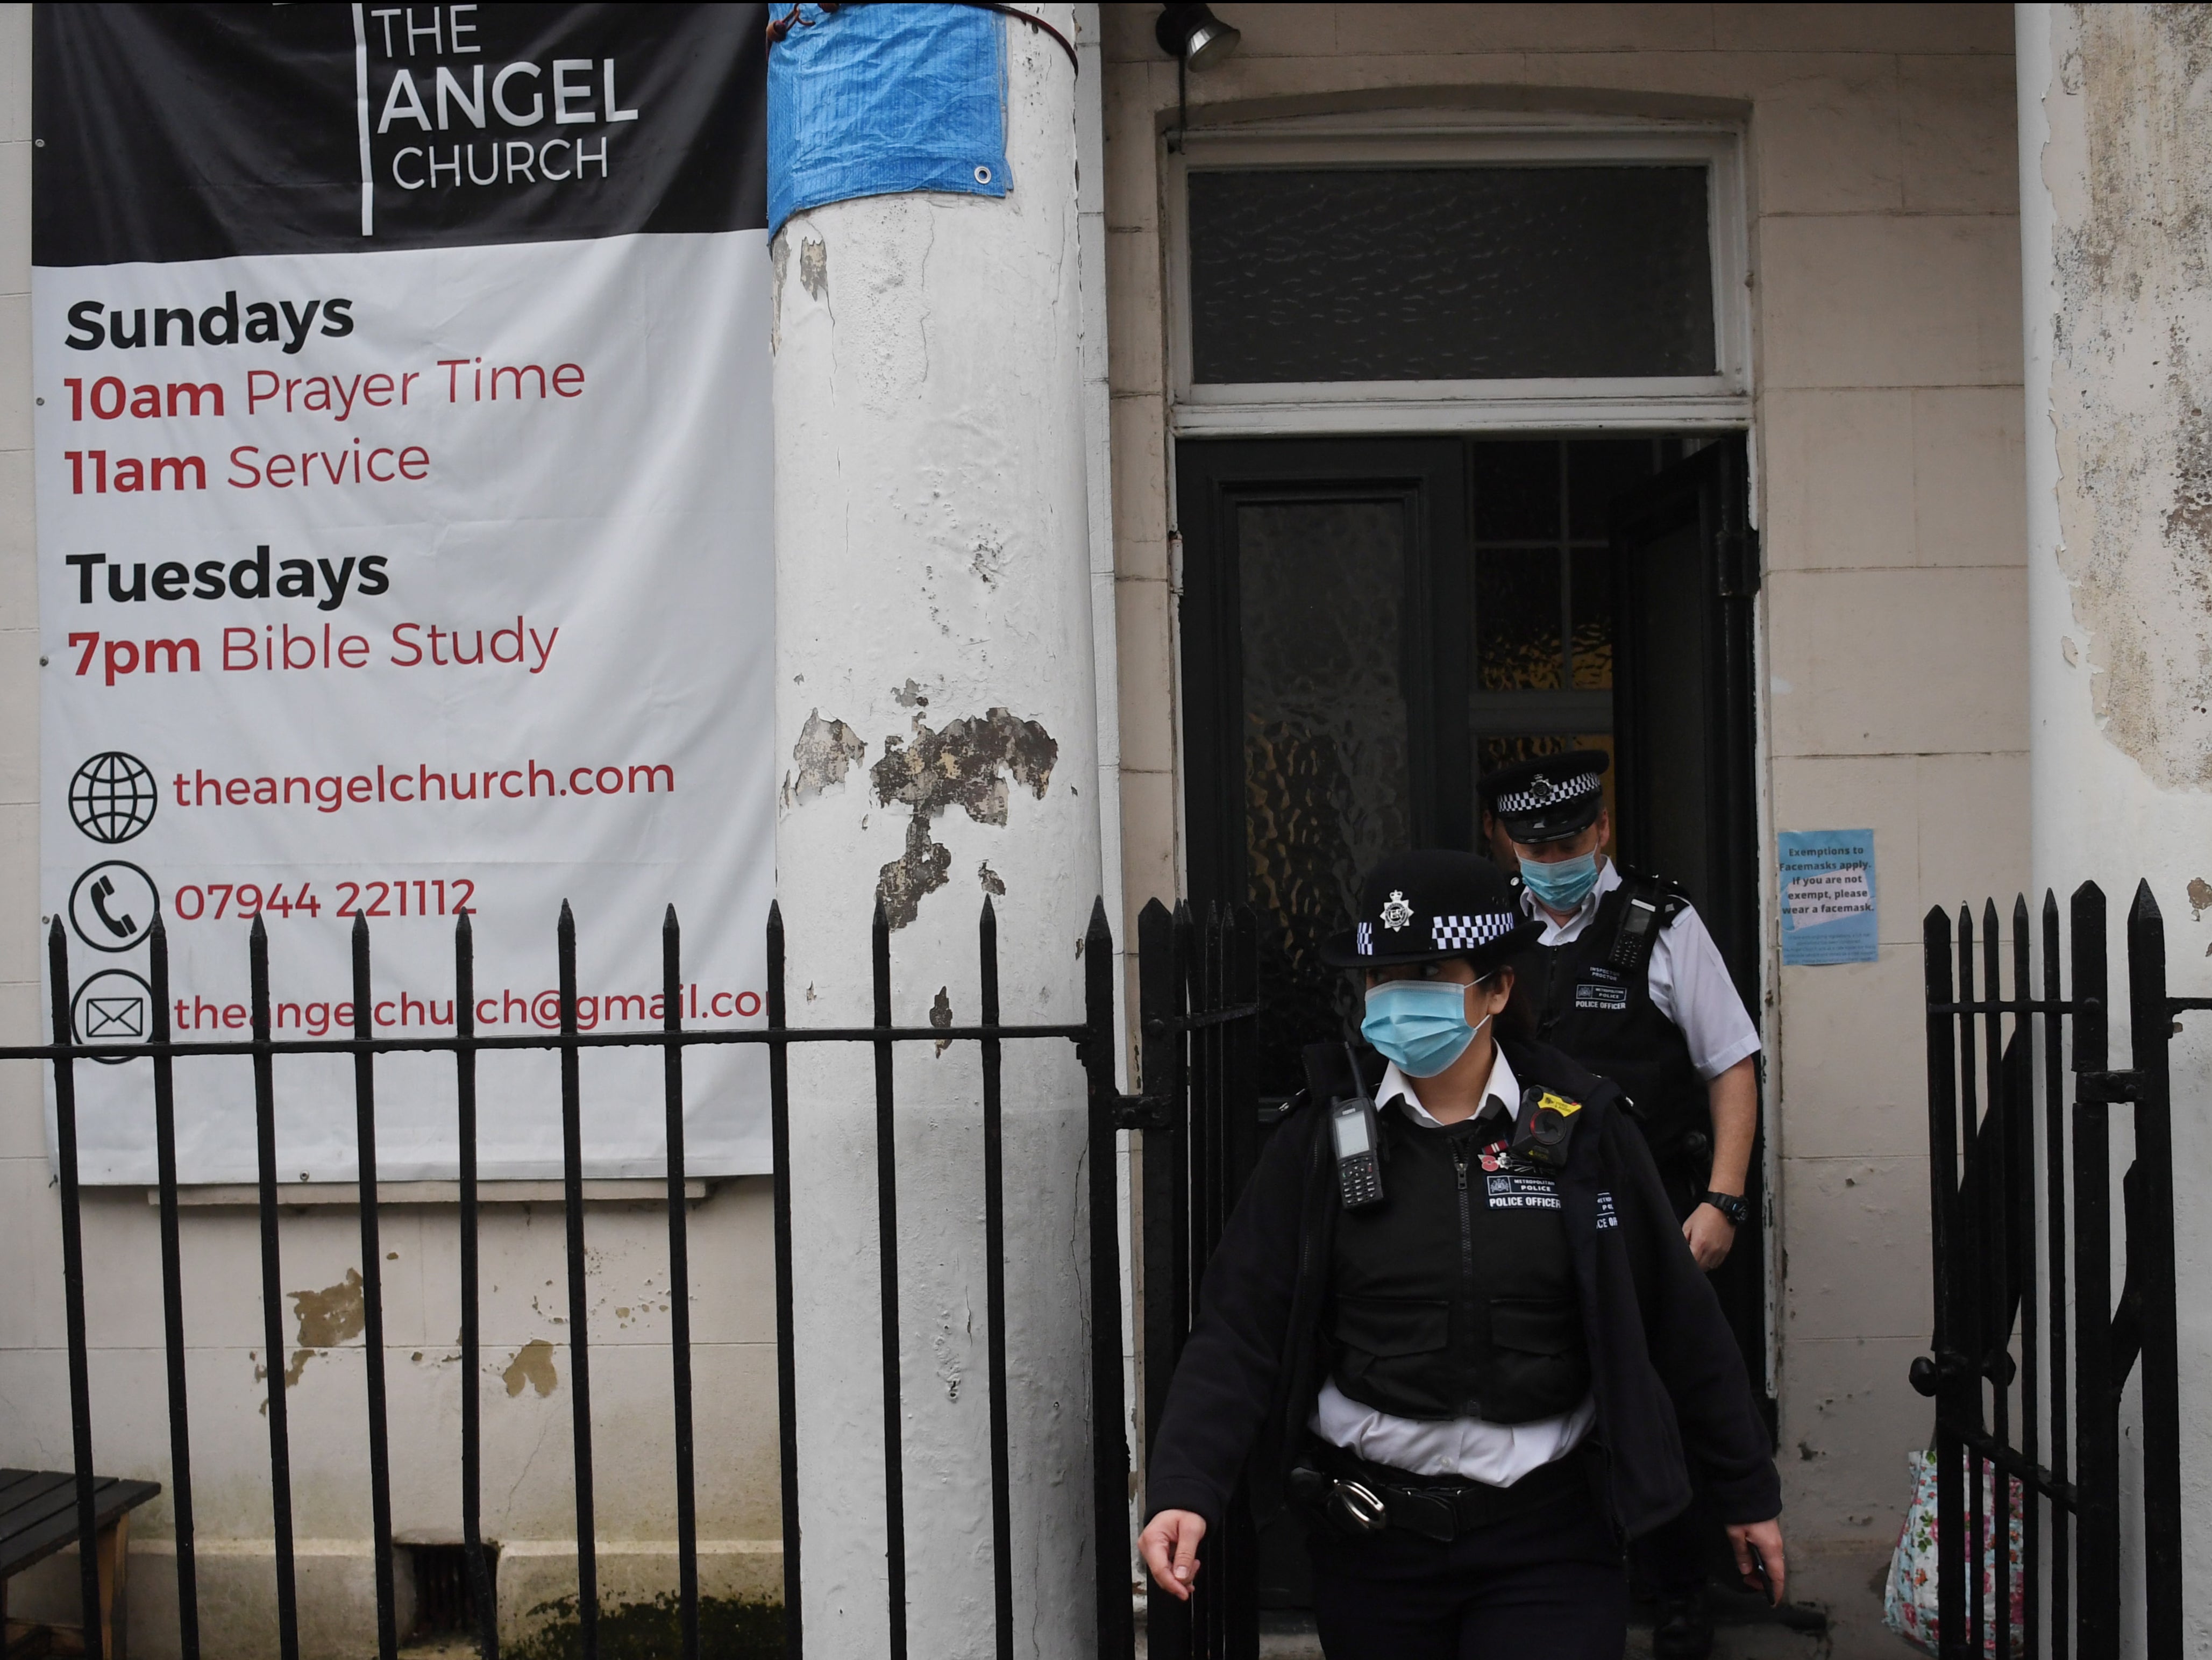 Police leave the Angel Church in north London. Pastor Regan King said he disagreed with the enforcement of restrictions on religious gatherings